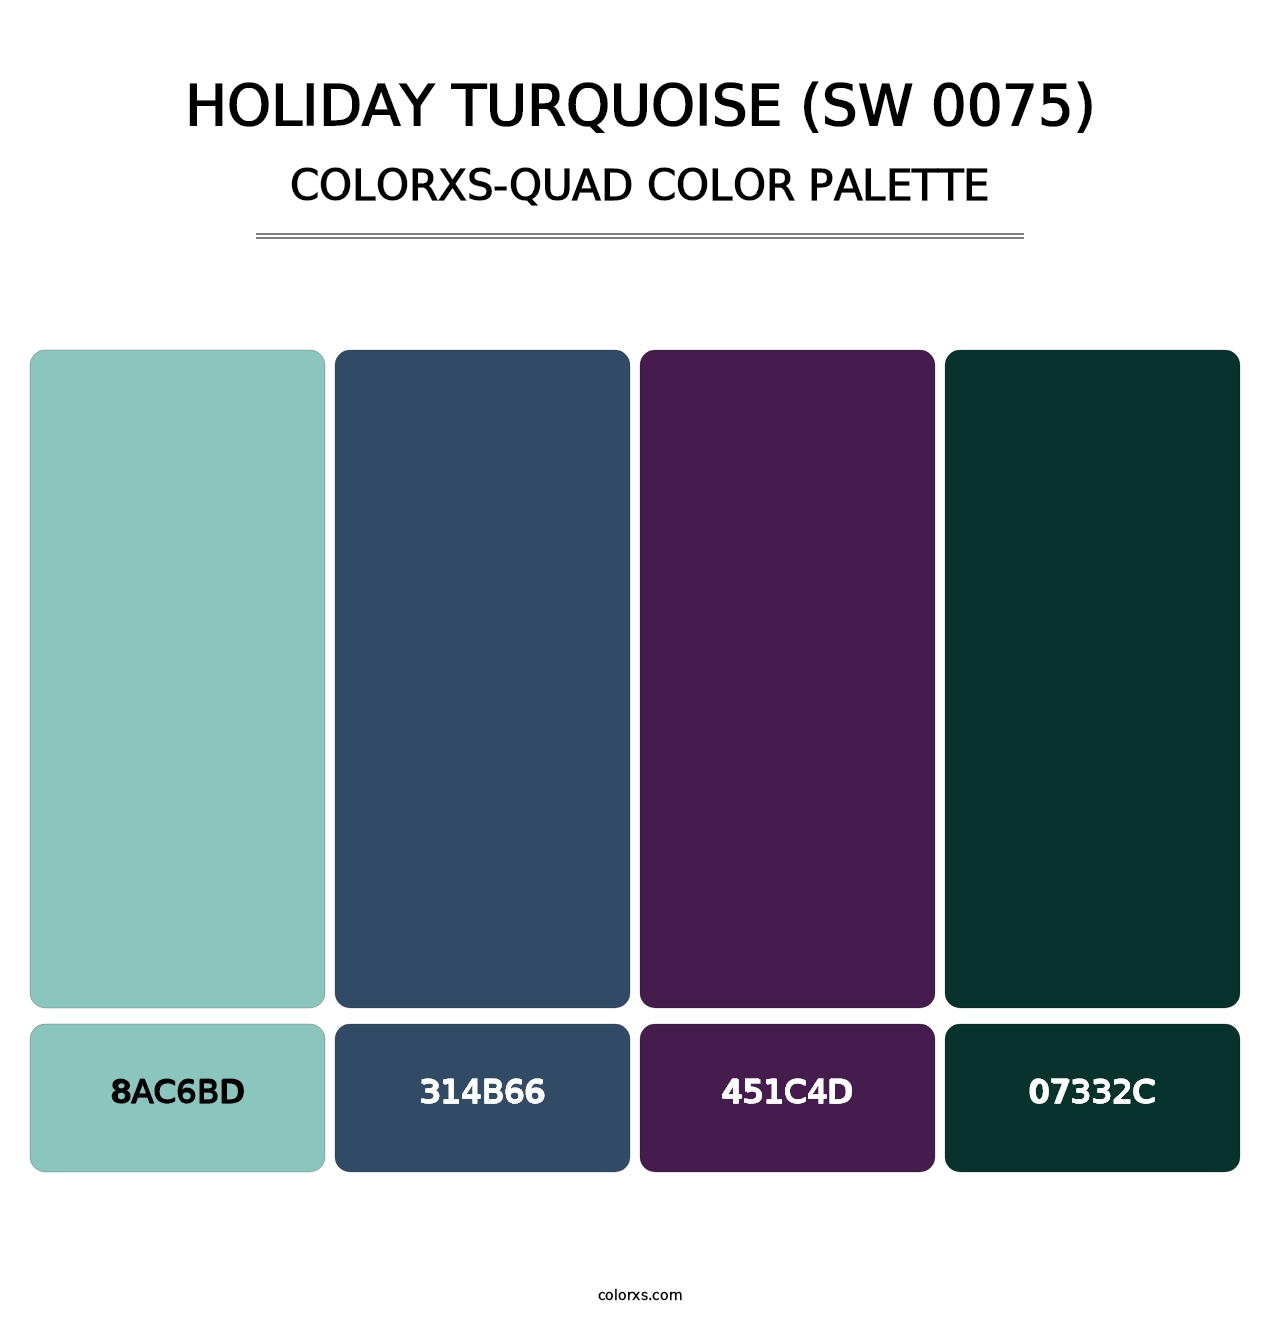 Holiday Turquoise (SW 0075) - Colorxs Quad Palette